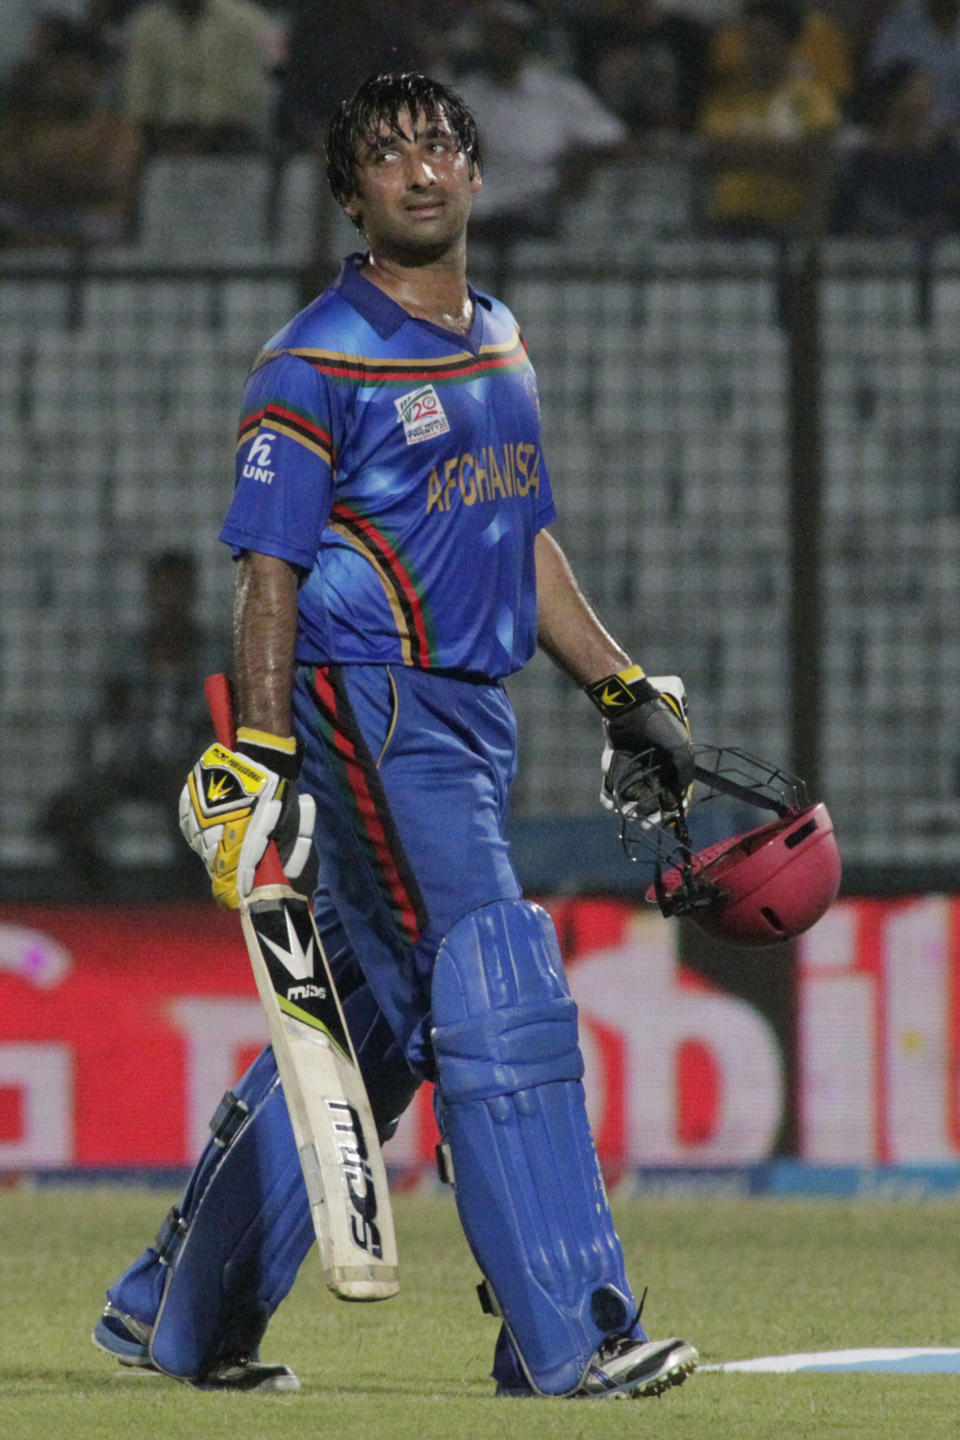 Afghanistan's Asghar Stanikzai watches the replay of his dismissal on a giant screen as he walks out during their ICC Twenty20 Cricket World Cup match against Nepal in Chittagong, Bangladesh, Thursday, March 20, 2014. (AP Photo/Bikas Das)